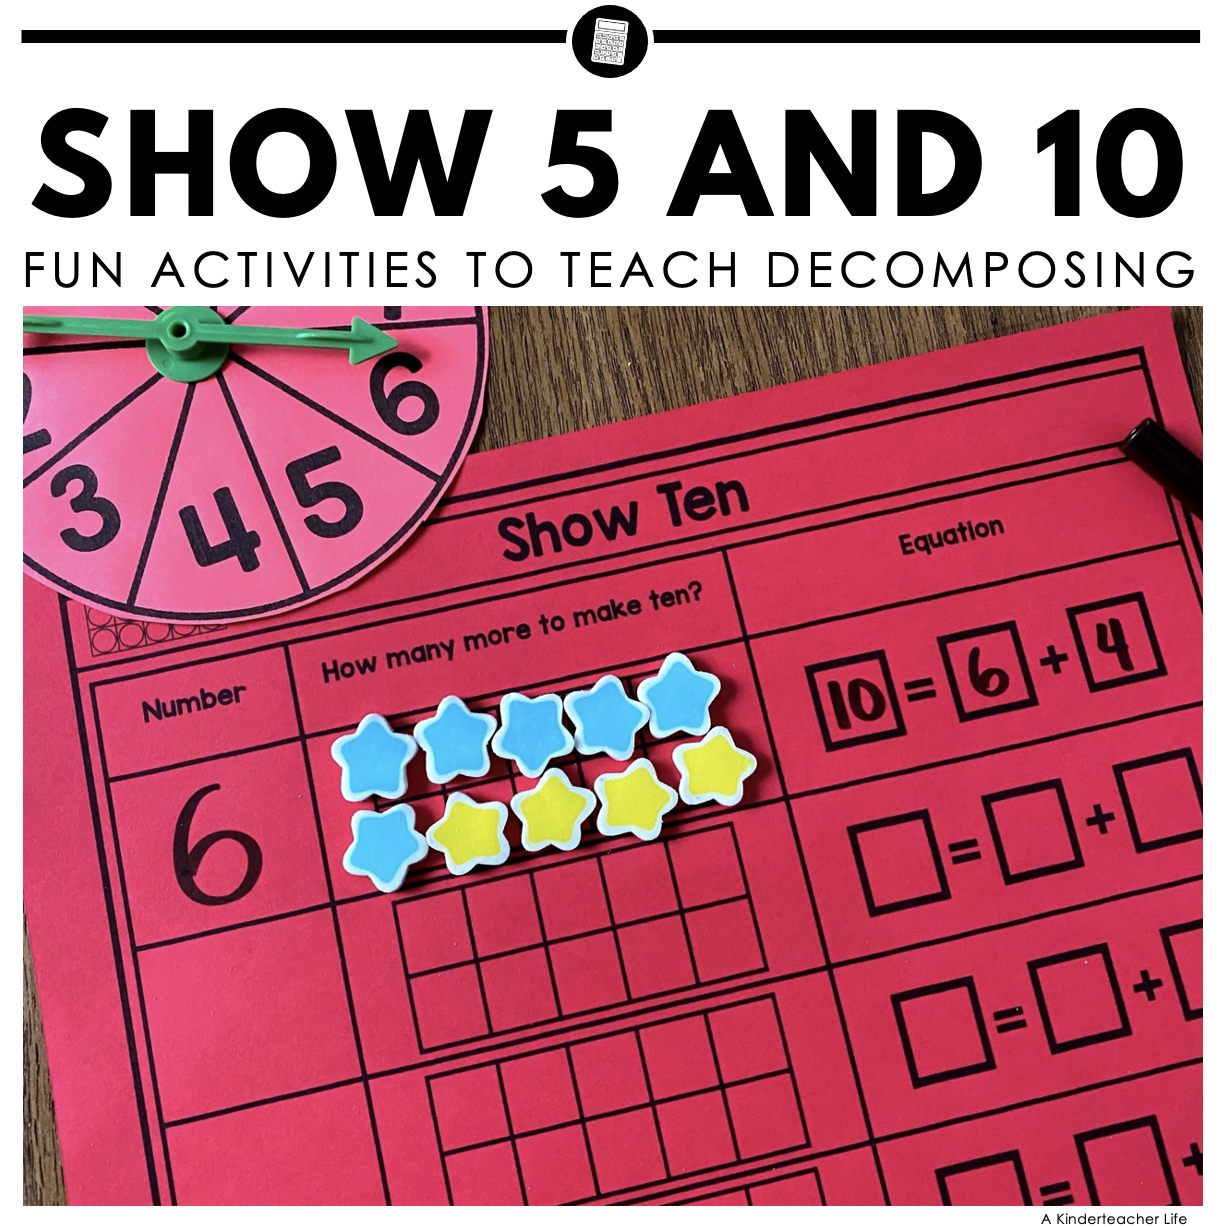 More ways to teach decomposing